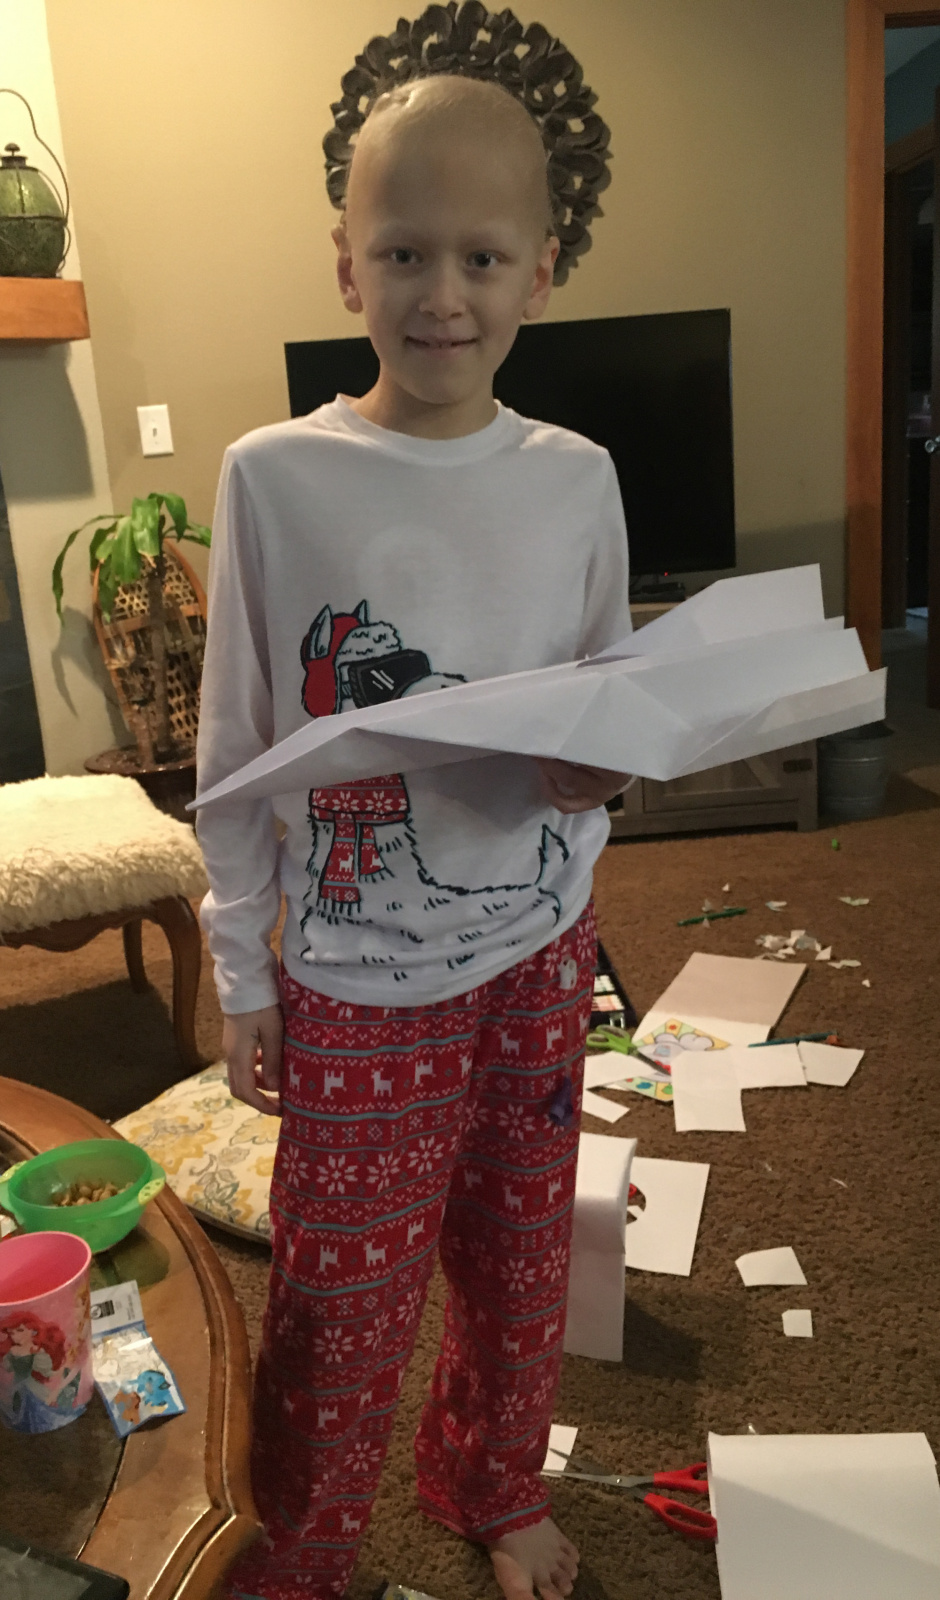 He's so smart! A regular piece of paper wasn't enough, he had to glue four pieces together to make a MONSTER plane. Also, I told him he looks like Bob Ross the way his head is positioned in from of our wall art.